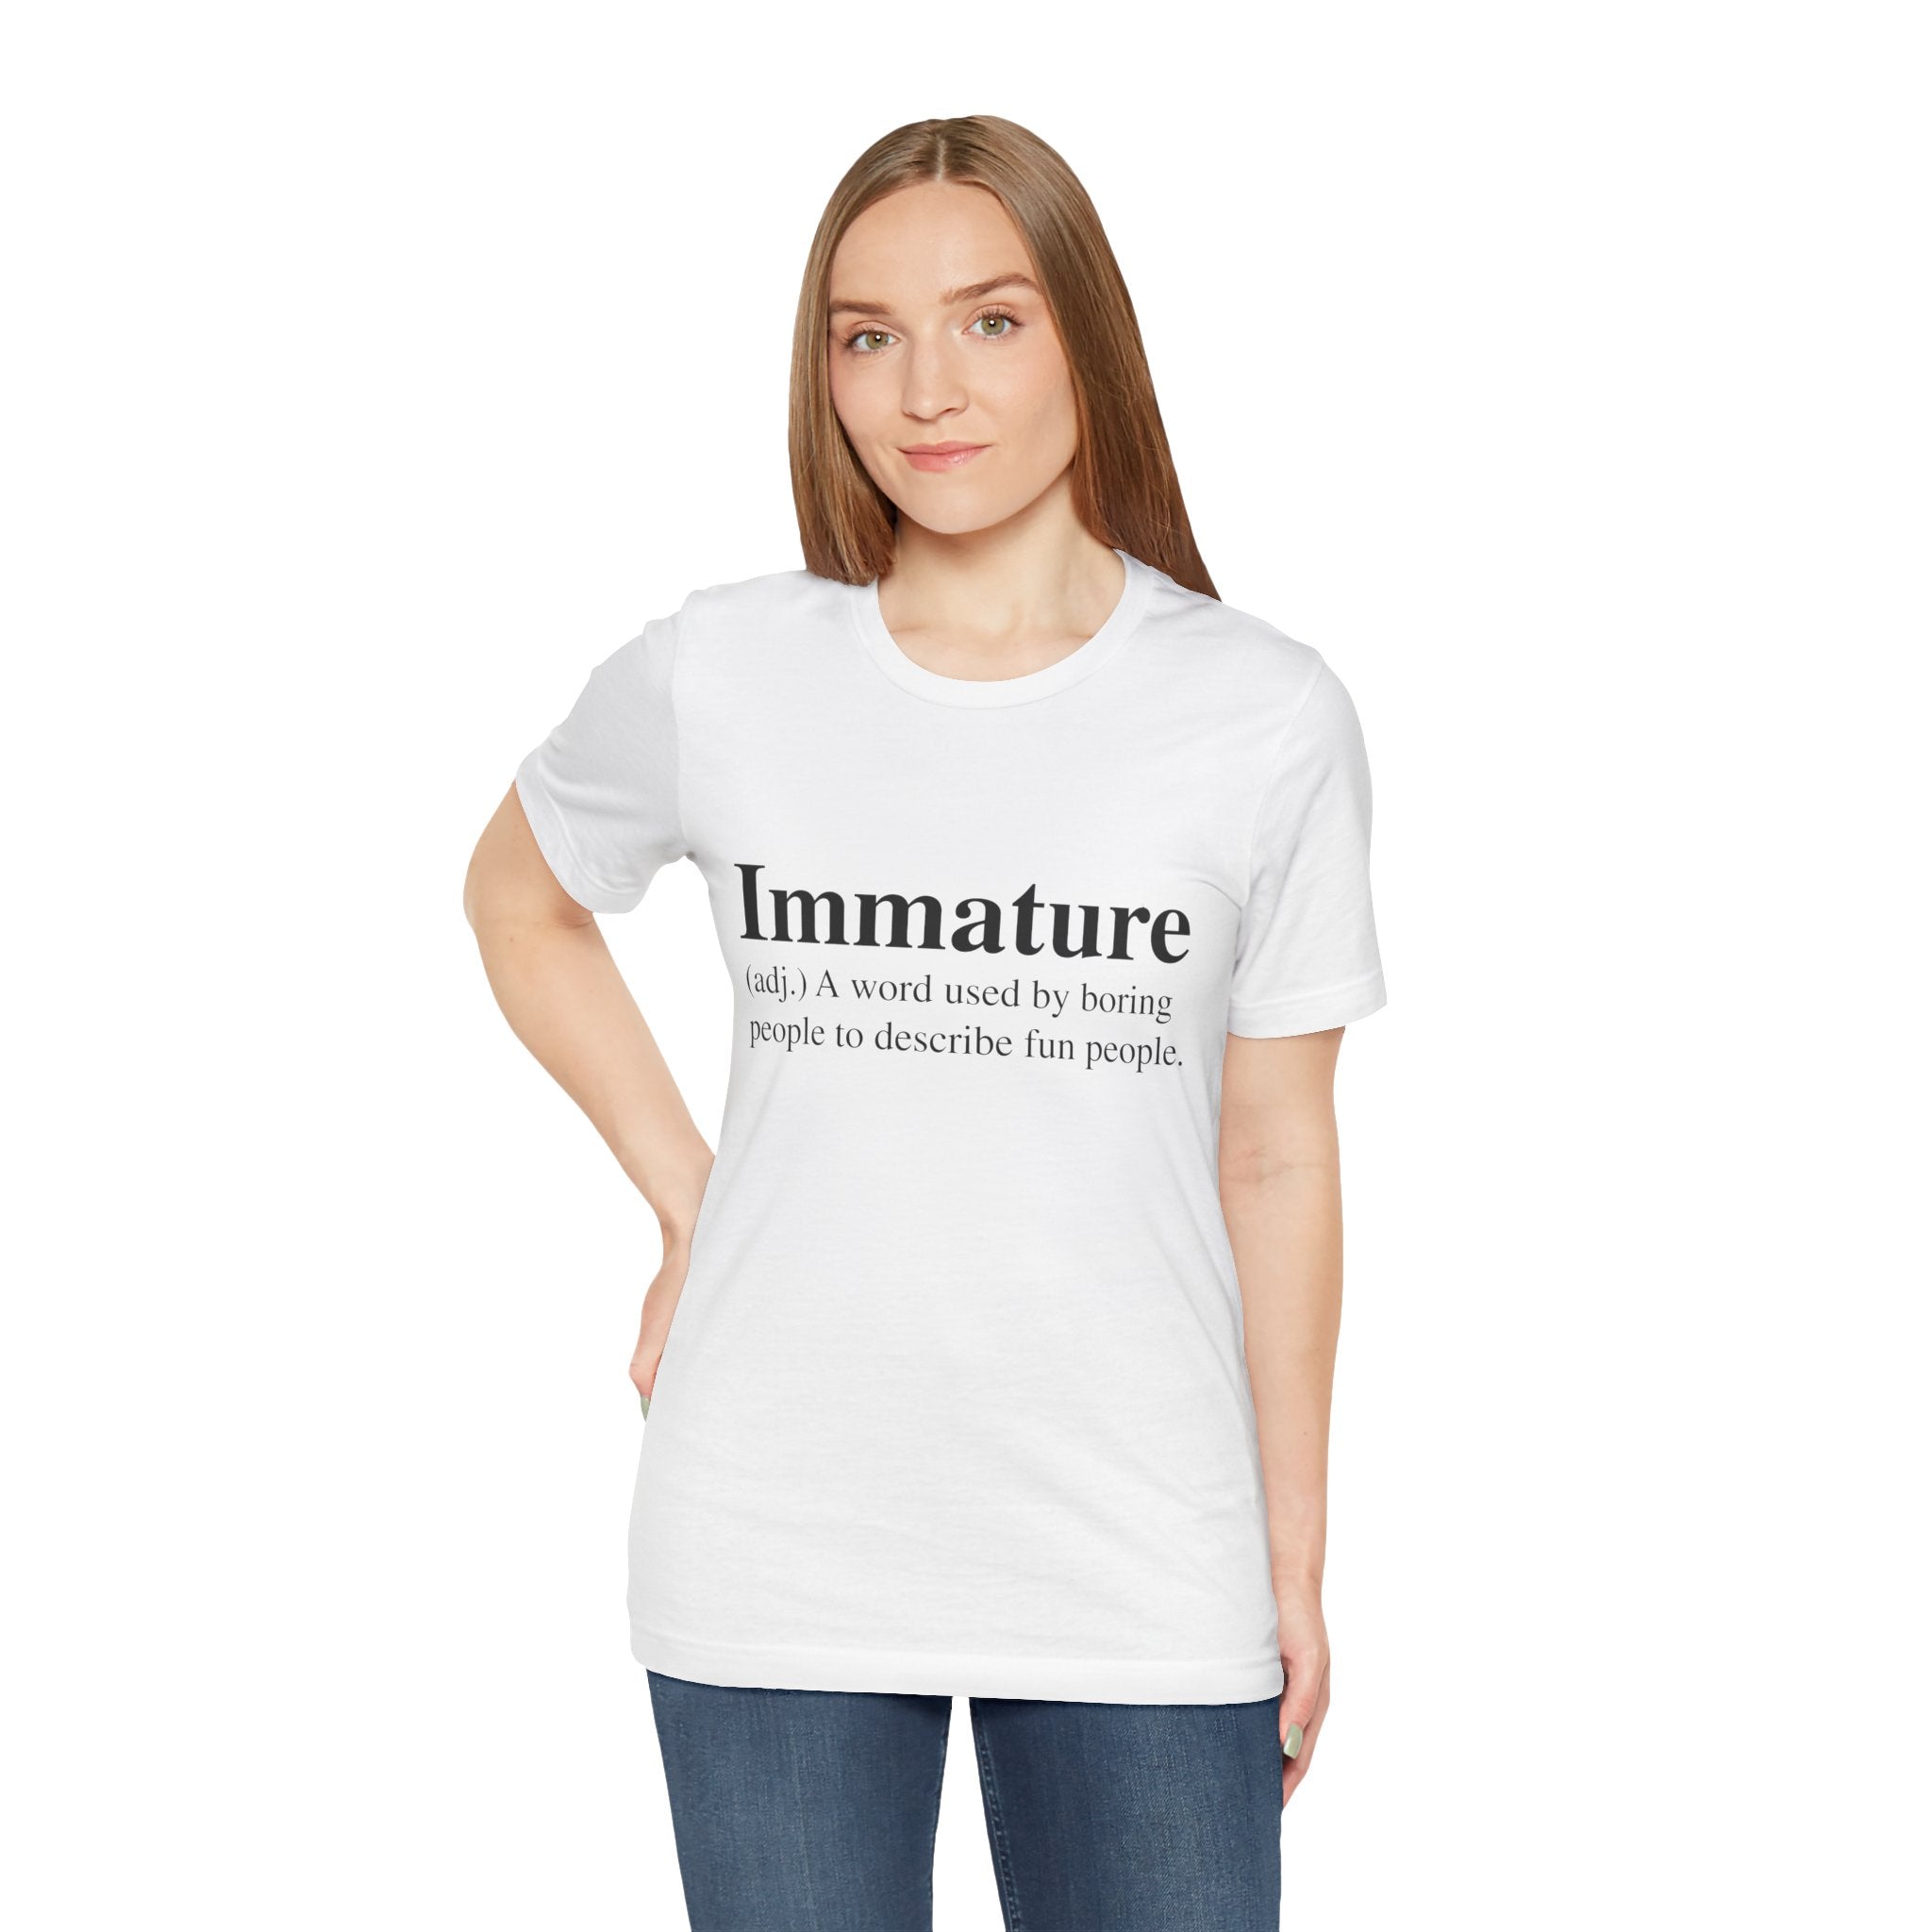 Woman in a white Immature T-Shirt with the word "immature" and its definition printed in quality print, standing against a plain background.